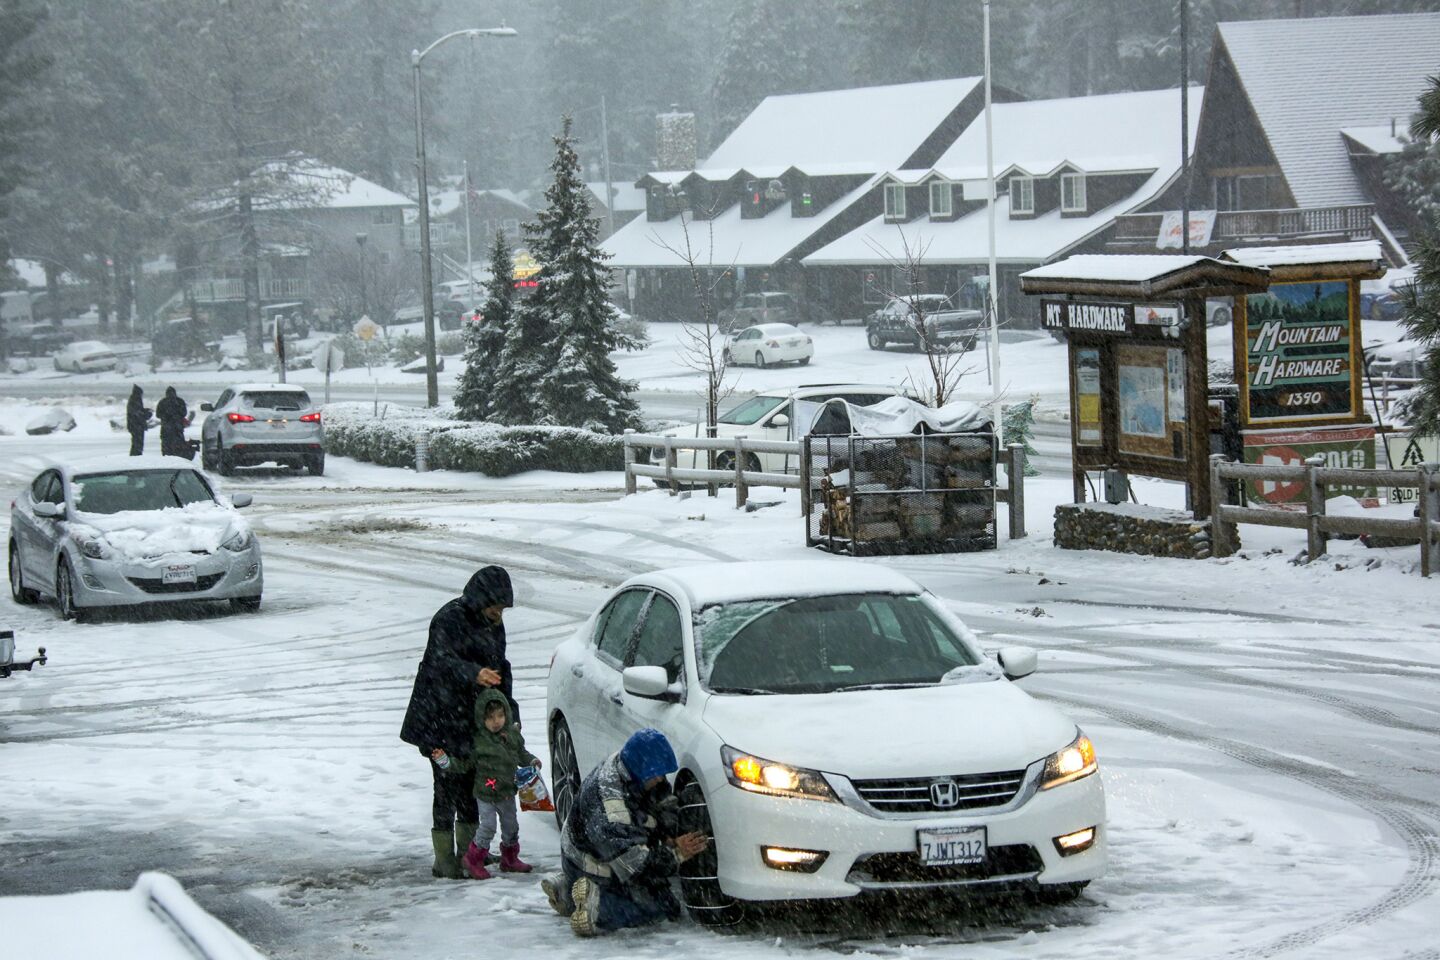 Due to heavy snow fall people visiting Wrightwood are required put on snow chains on their vehicles.